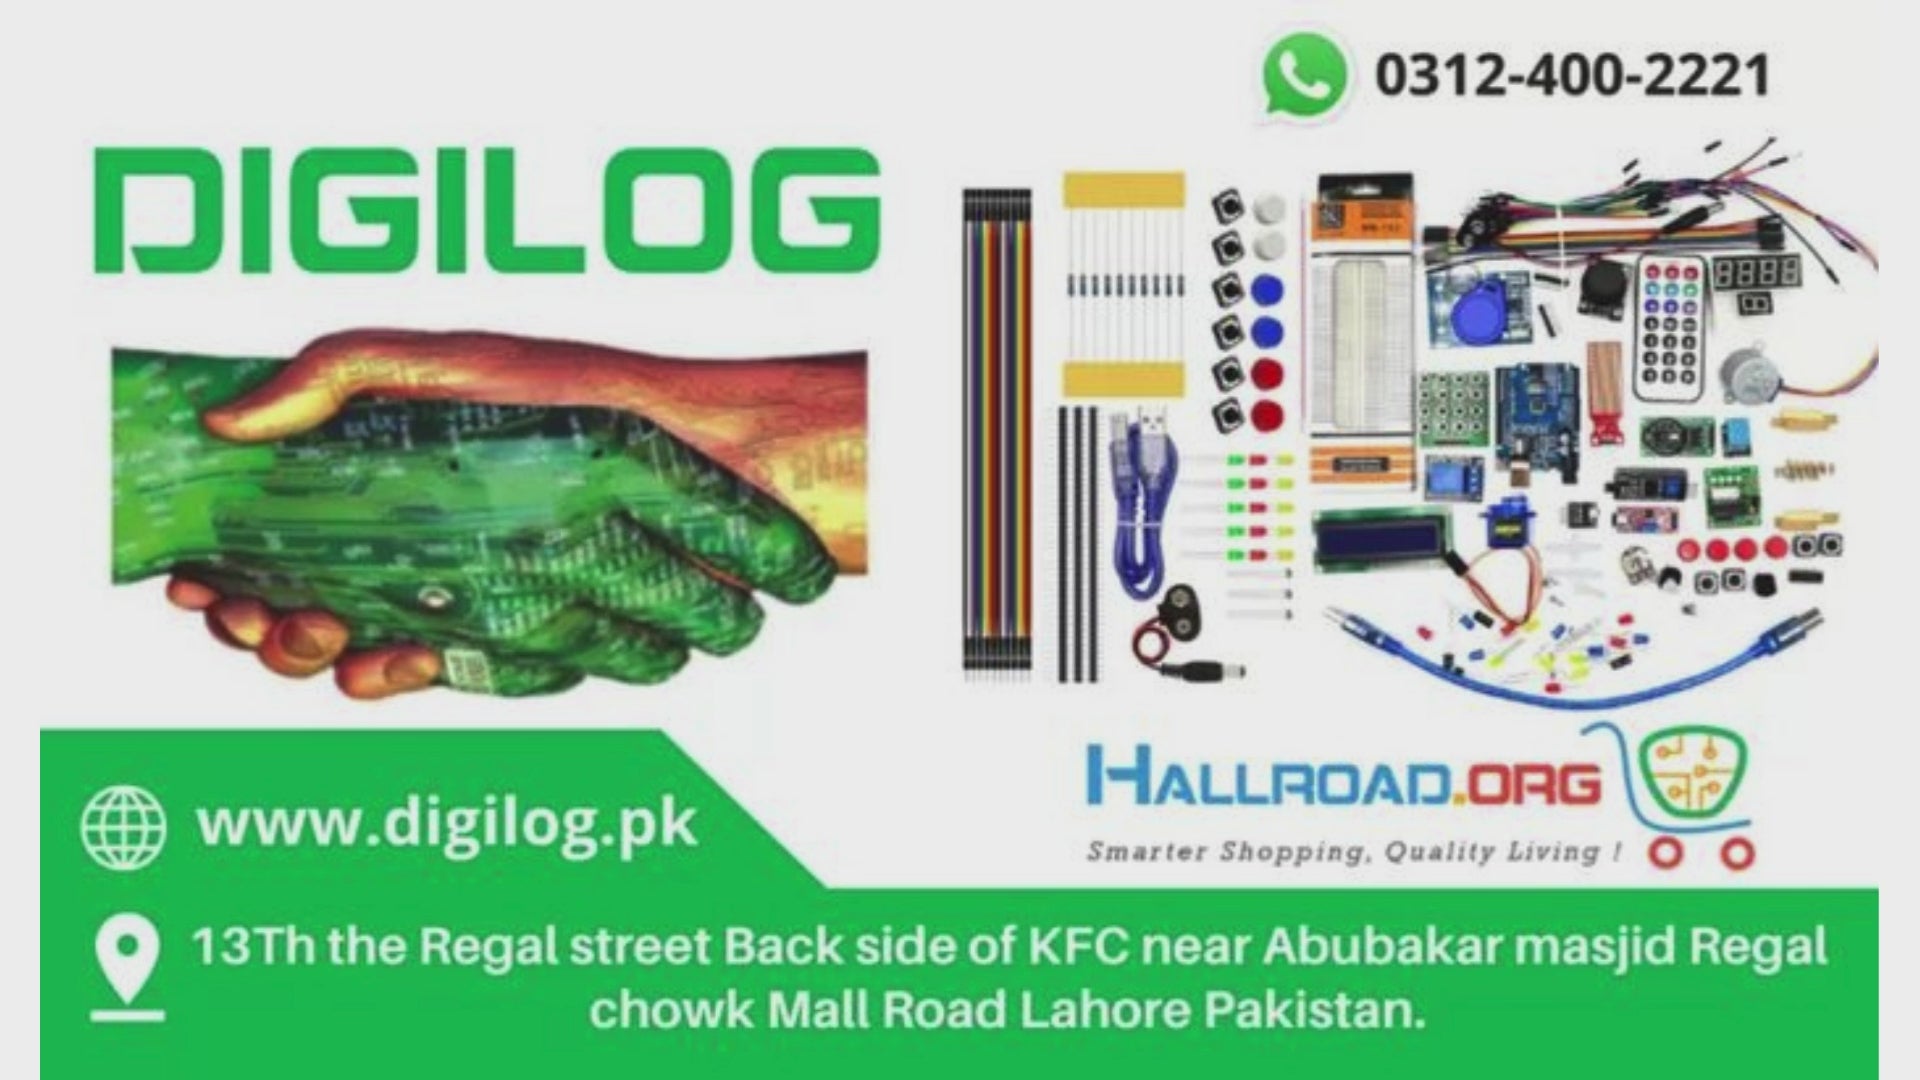 PD 65W Fast Charging Module Type C Interface Fast Charging Adapter Board DC8 to 32V Charging Protection in Pakistan Digilog.pk Digilog Electronics